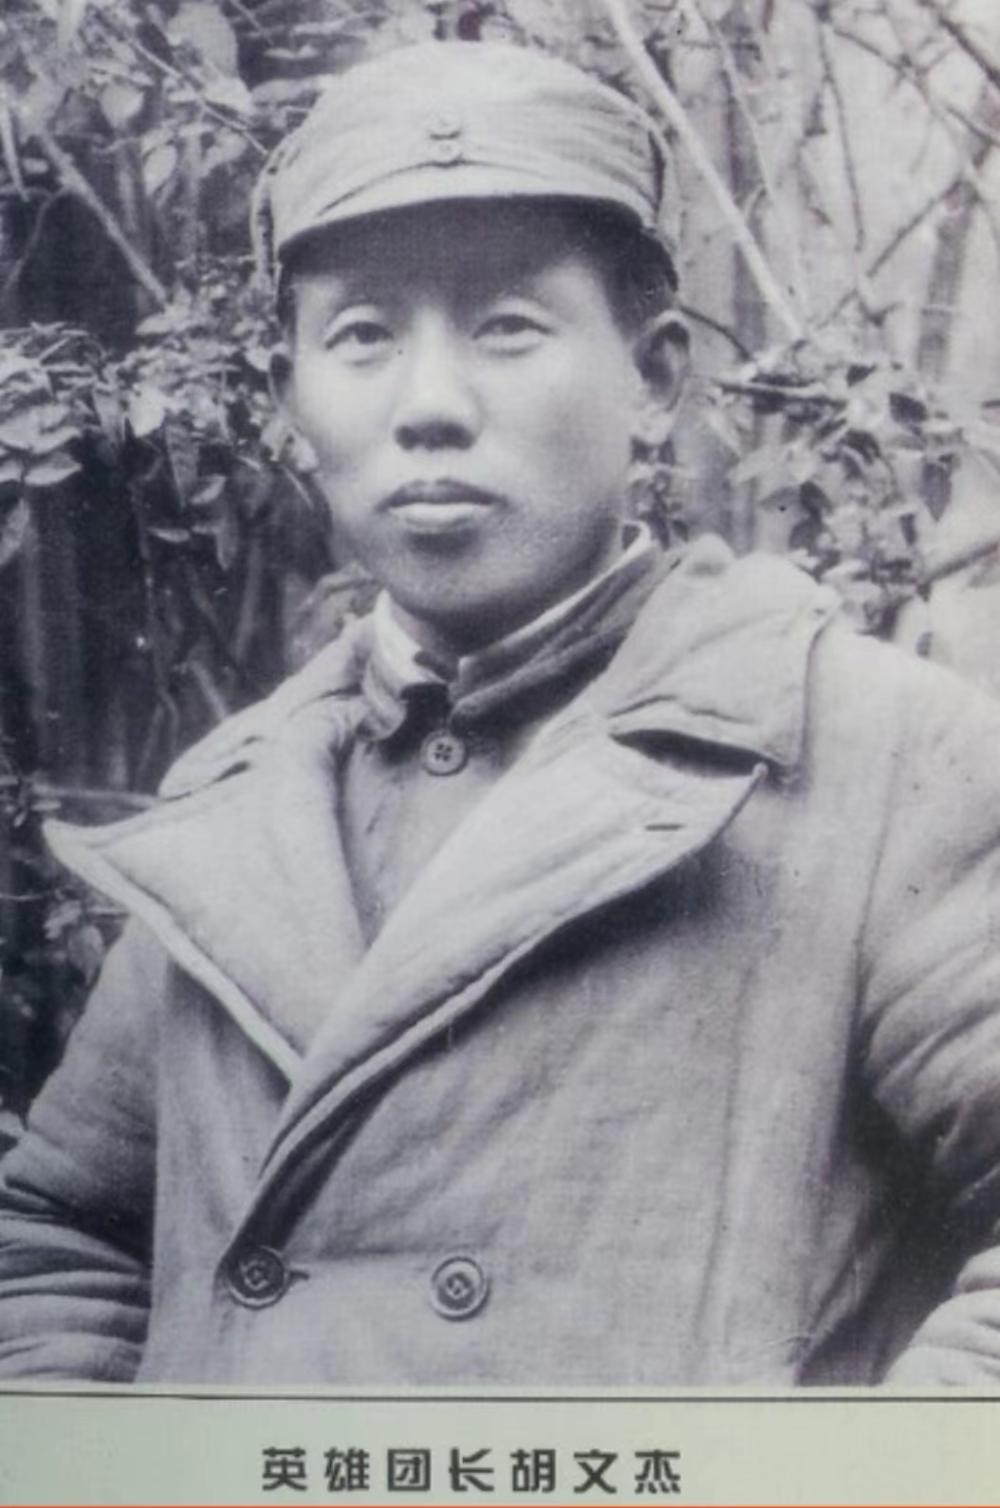 74 years later, Hu Wenjie was born 22 days after his father's sacrifice, telling the story of the "Battle of Shanghai" for a literary and artistic party class